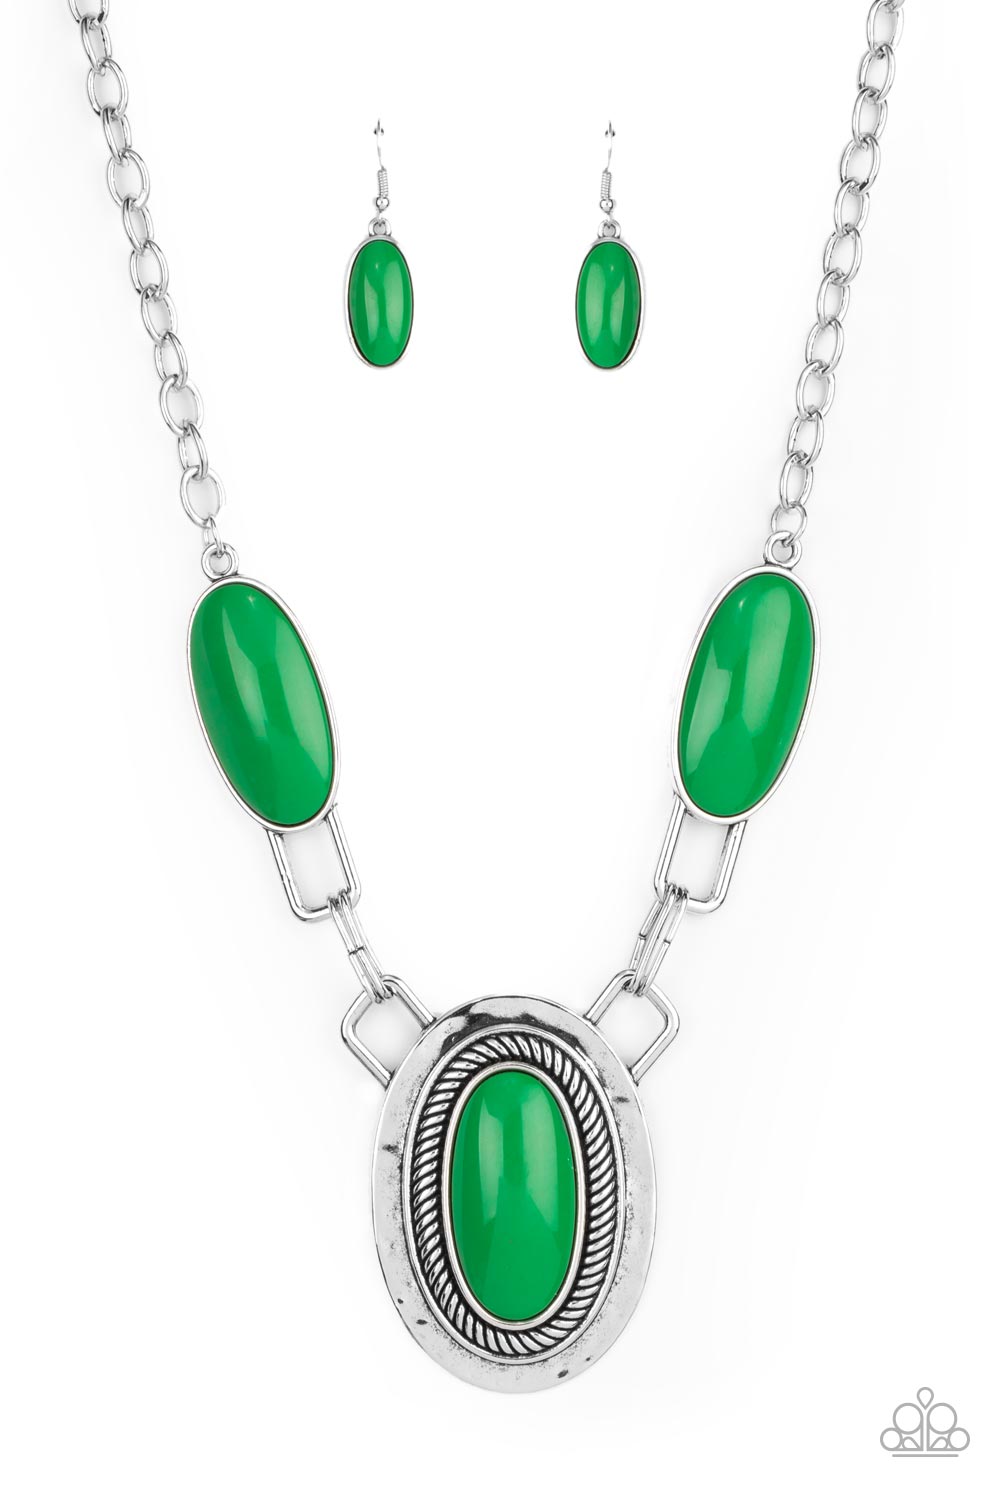 Count to TENACIOUS - Green necklace B086